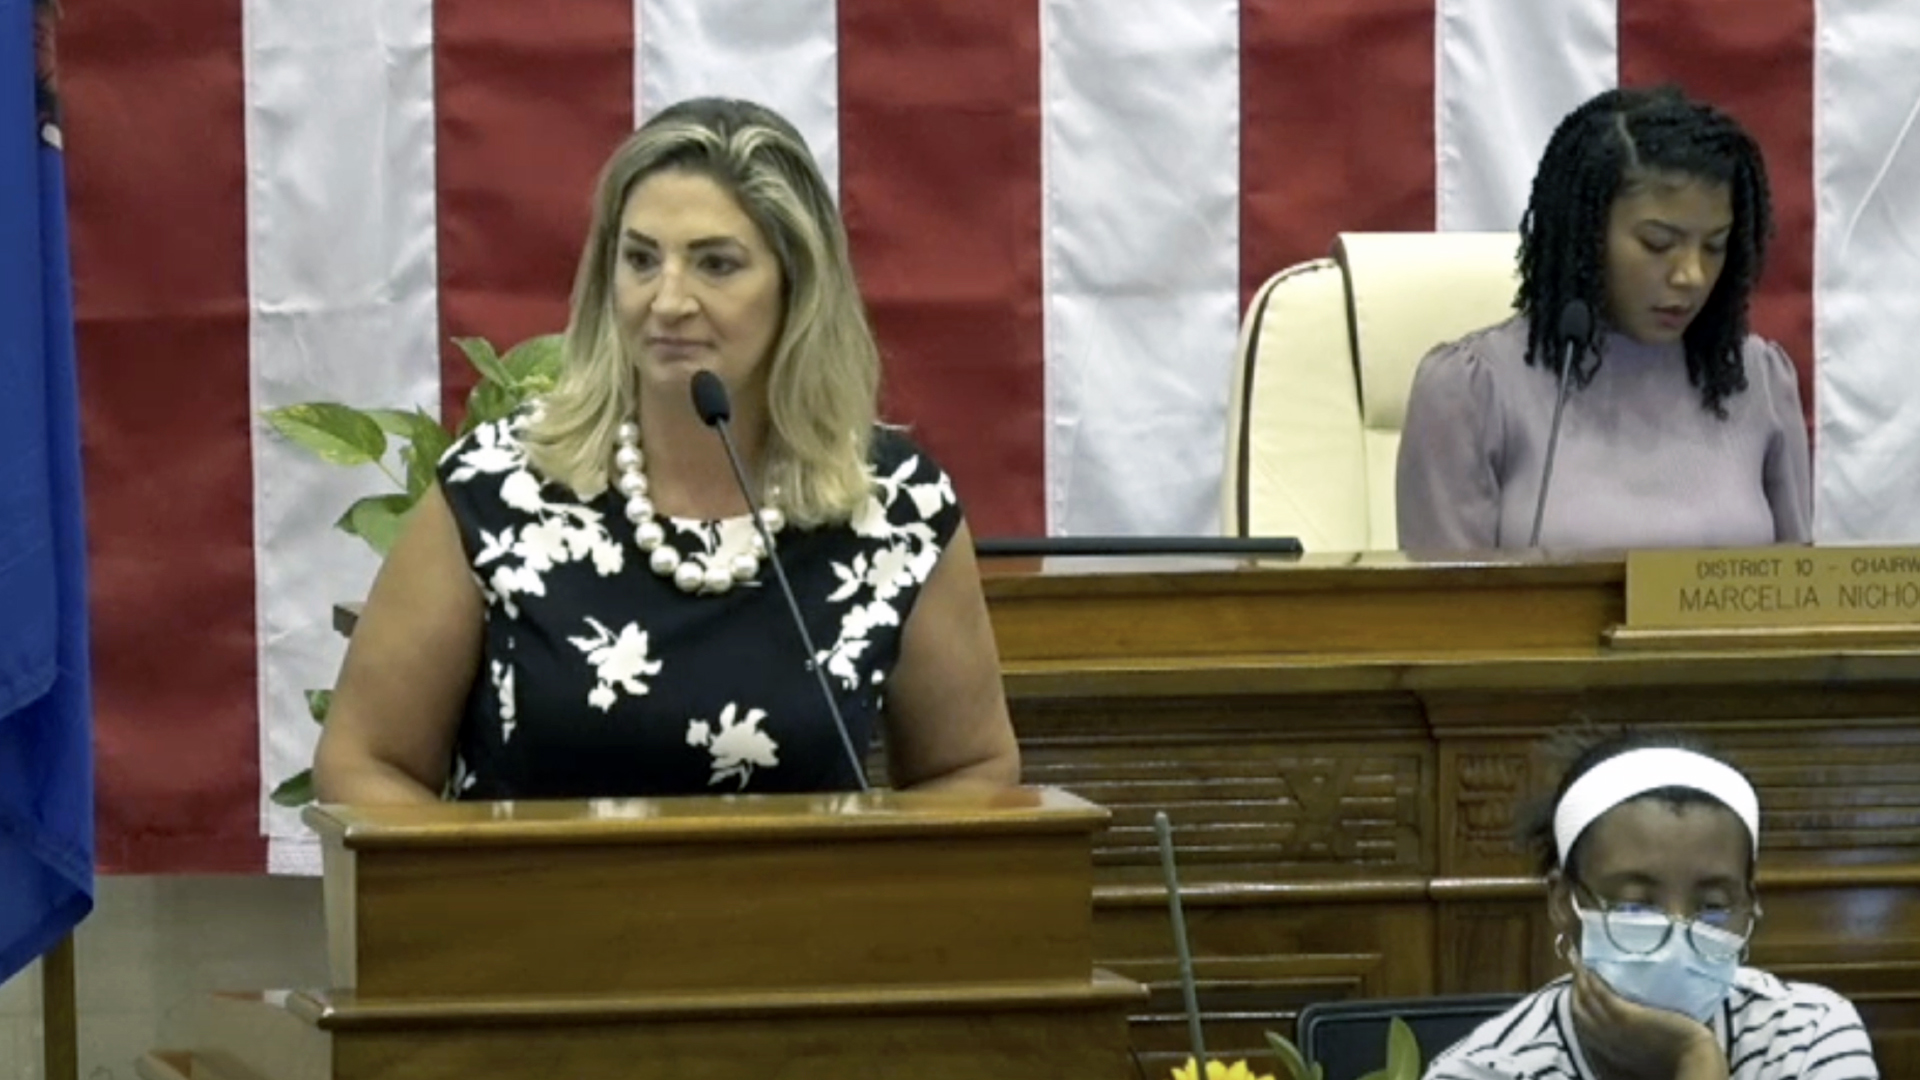 Margaret Daun speaks into a microphone while standing behind a wood podium, with two people to her side seated at a desk and legislative dais with wood carvings, with the vertical stripes of a large U.S. flag in the background.